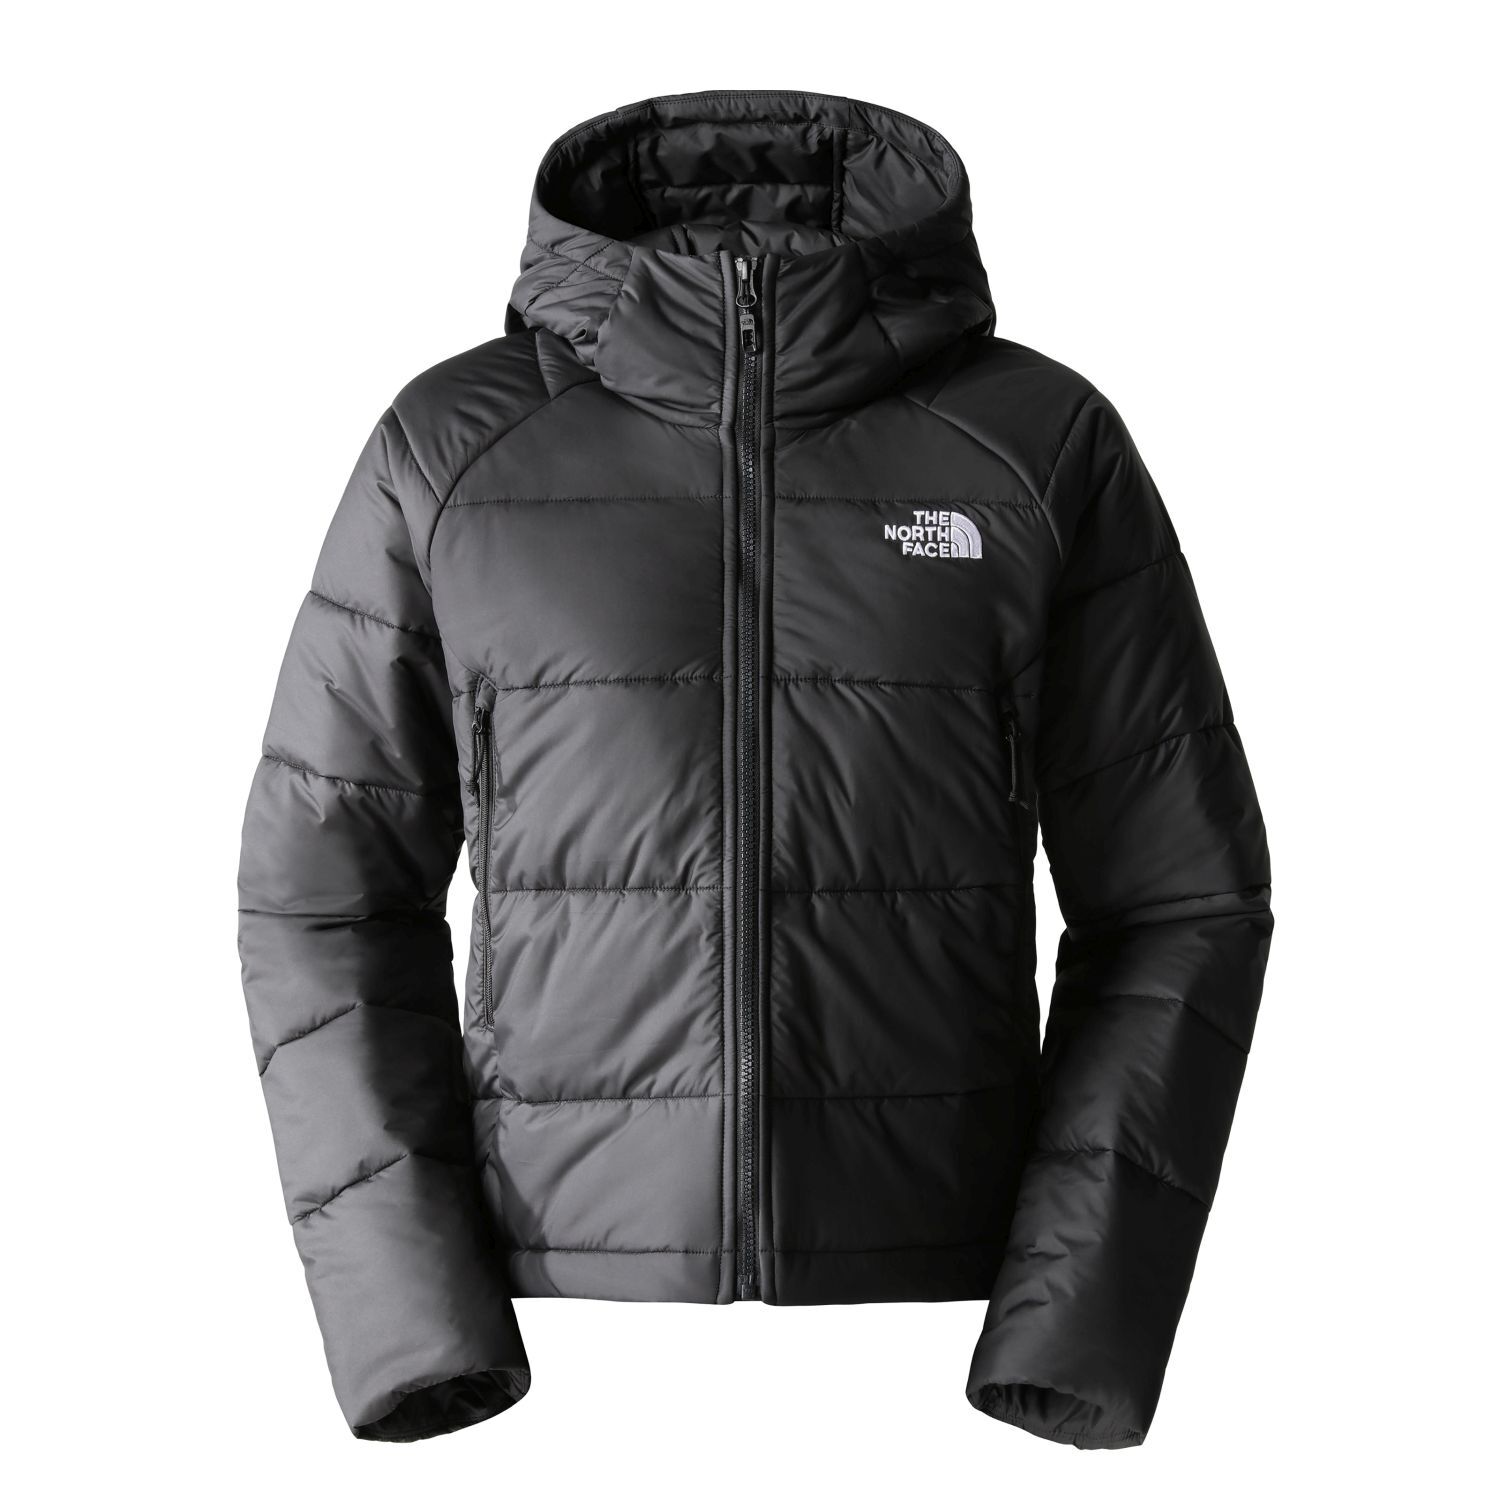 The North Face Women's Hyalite Synthetic Hoodie online bobleisure